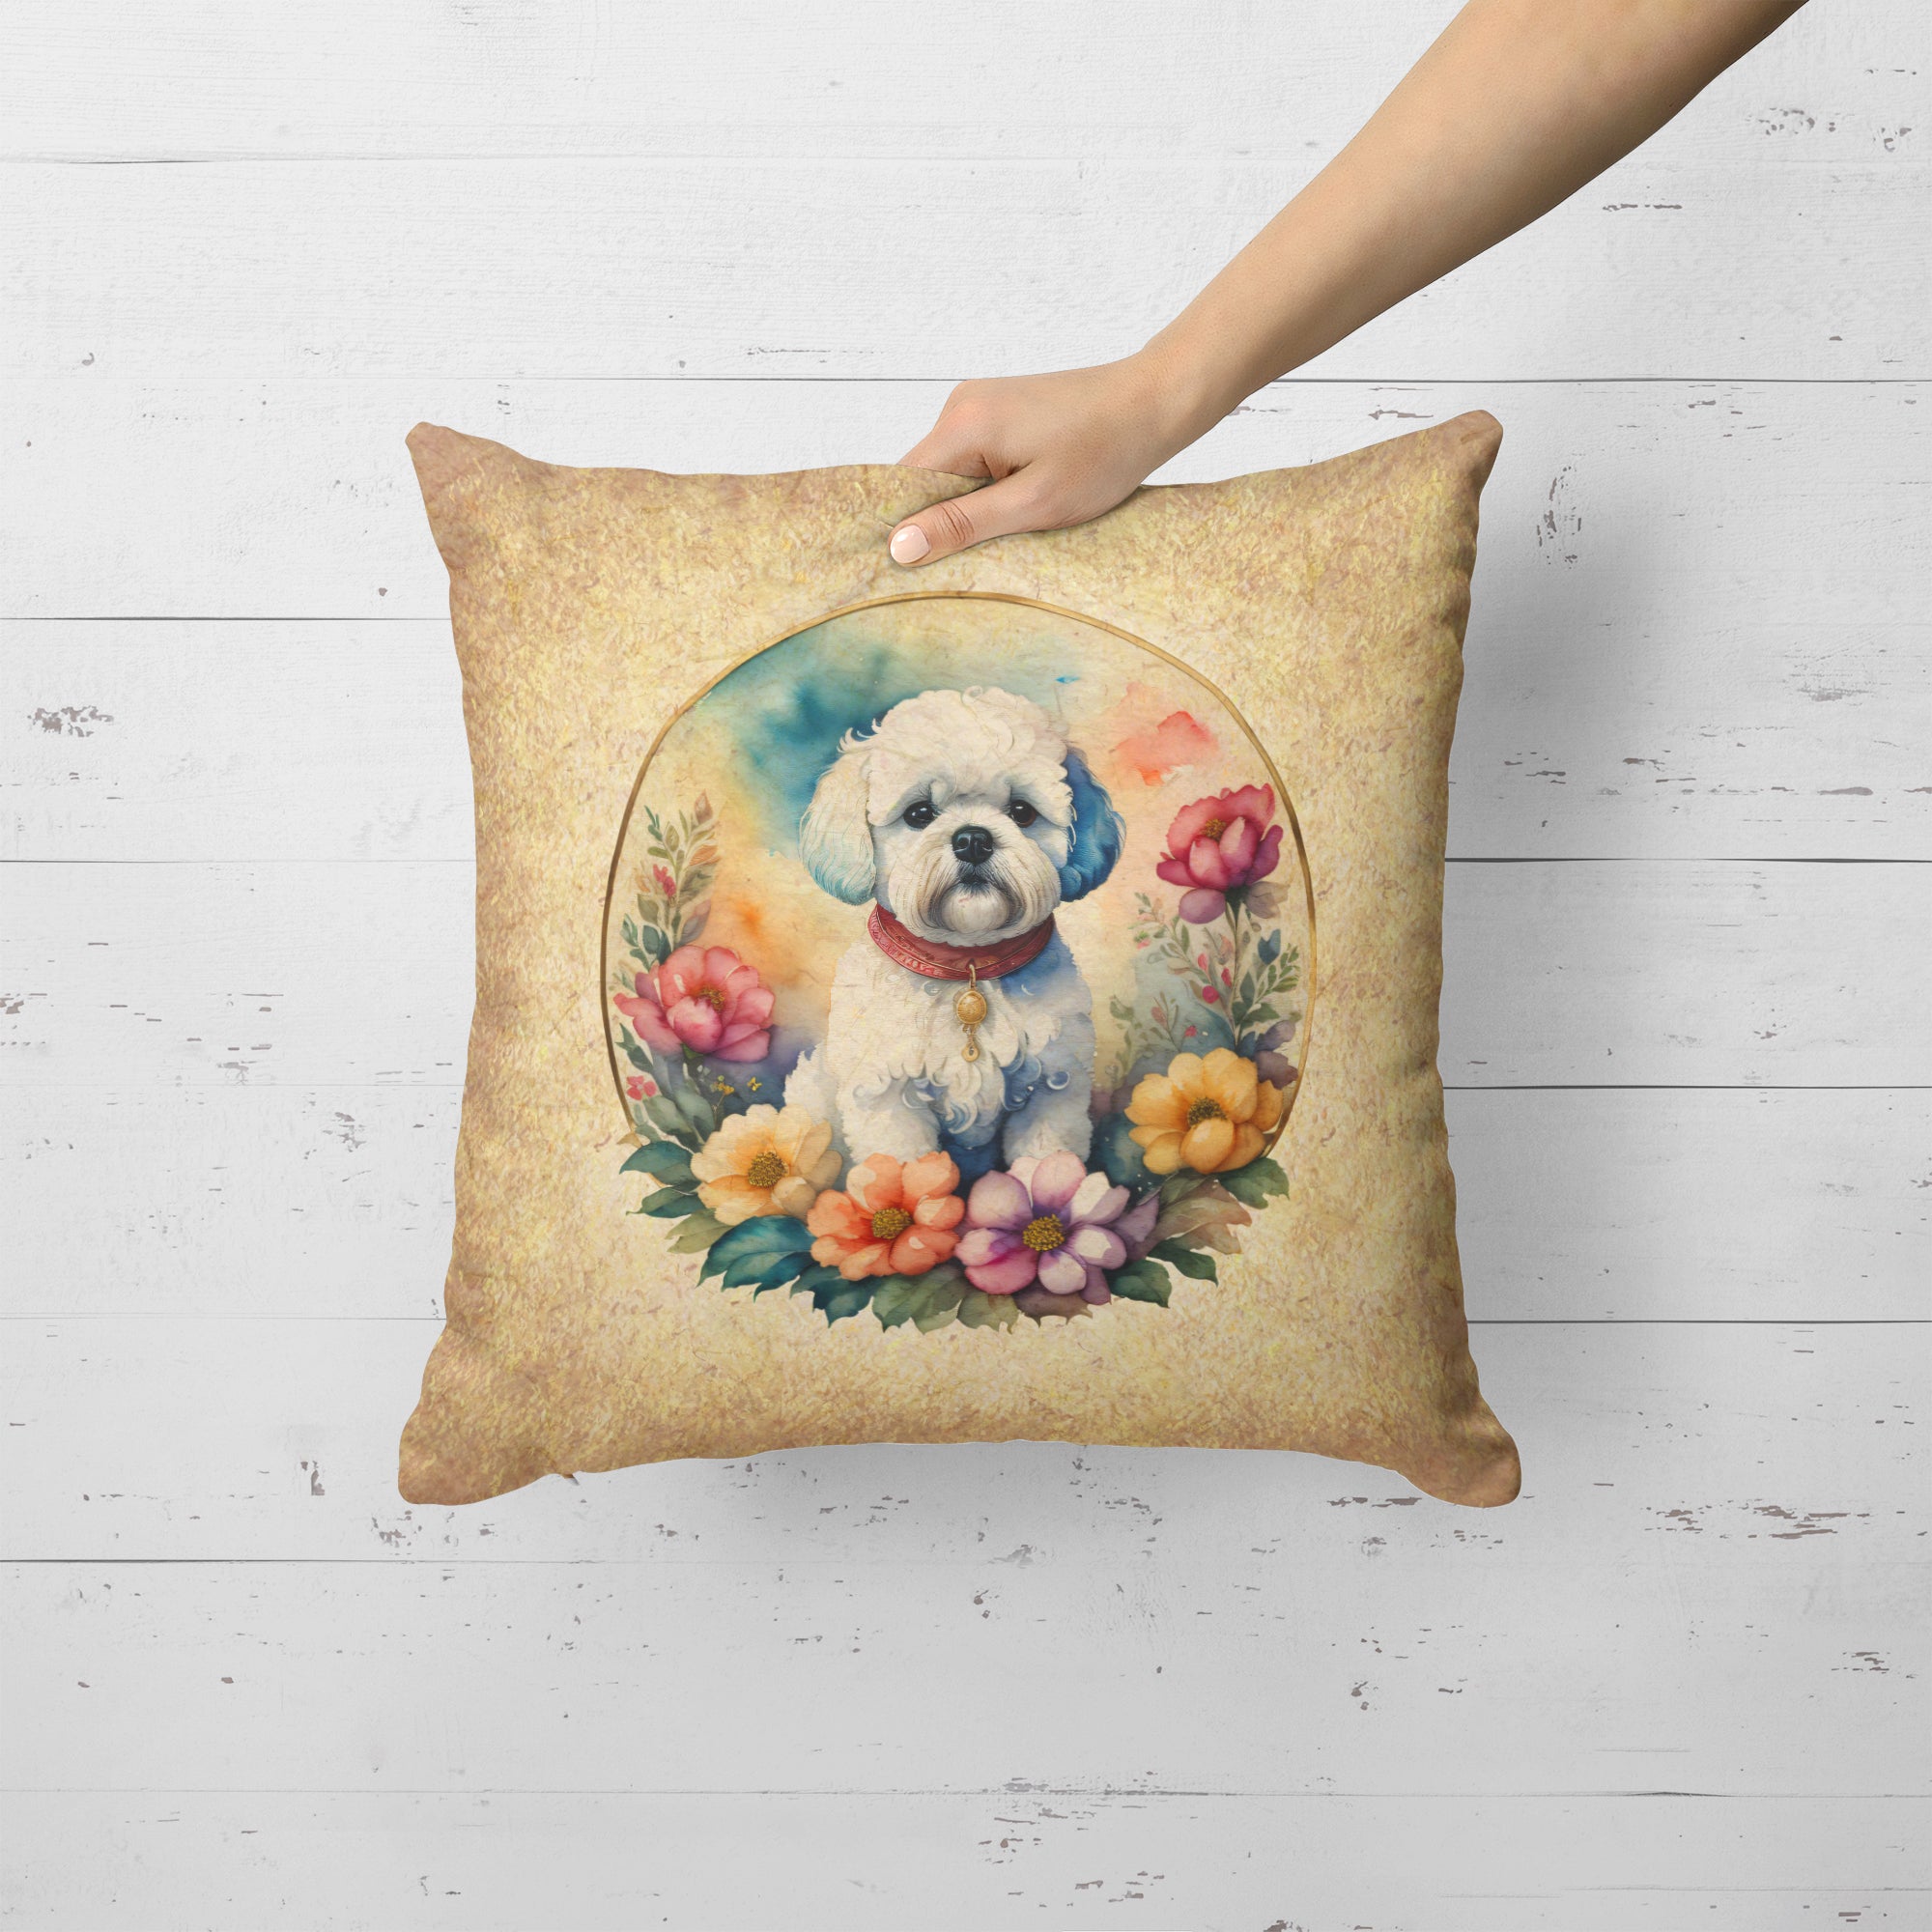 Buy this Bichon Frise and Flowers Fabric Decorative Pillow